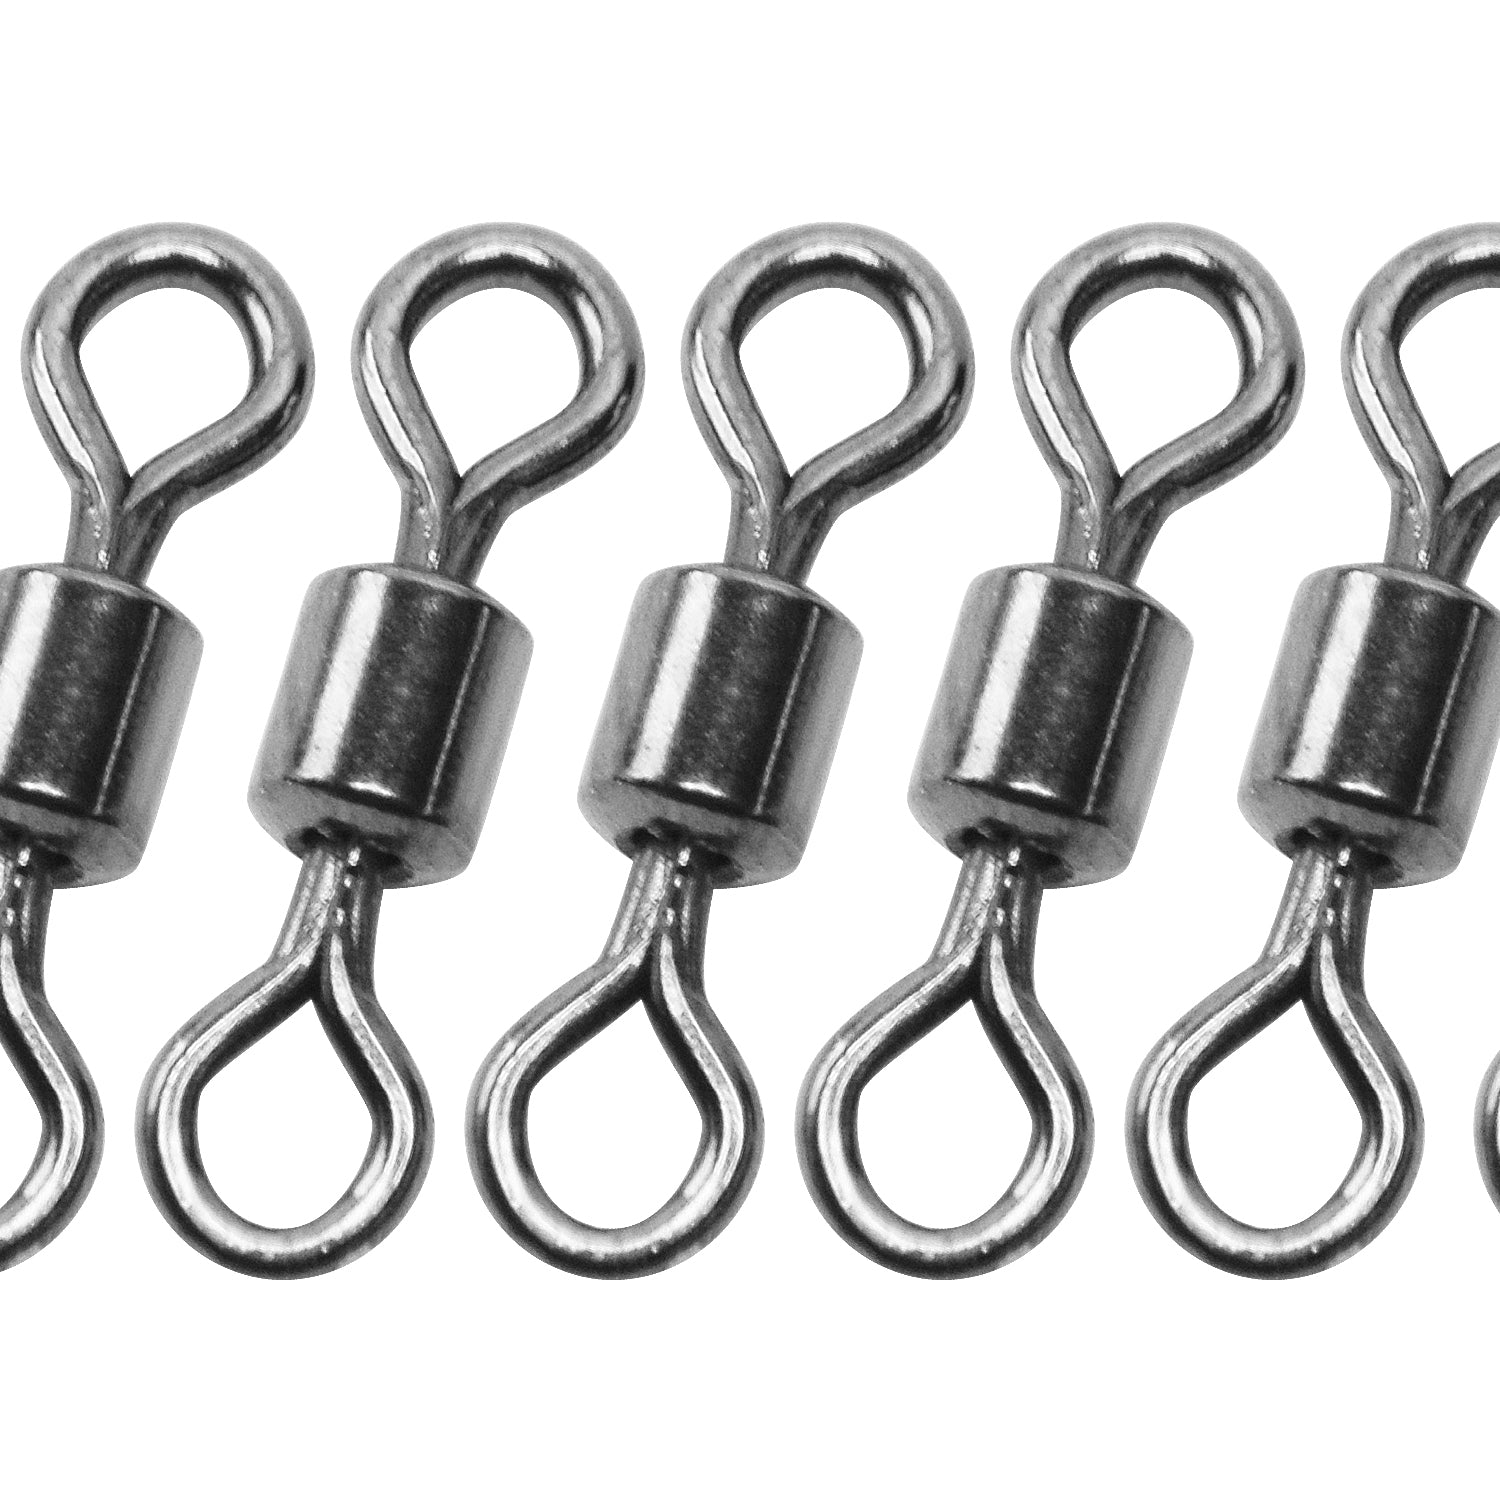 Minfishing 25 Pcs/Lot Stainless Steel Fishing Swivel Snap with